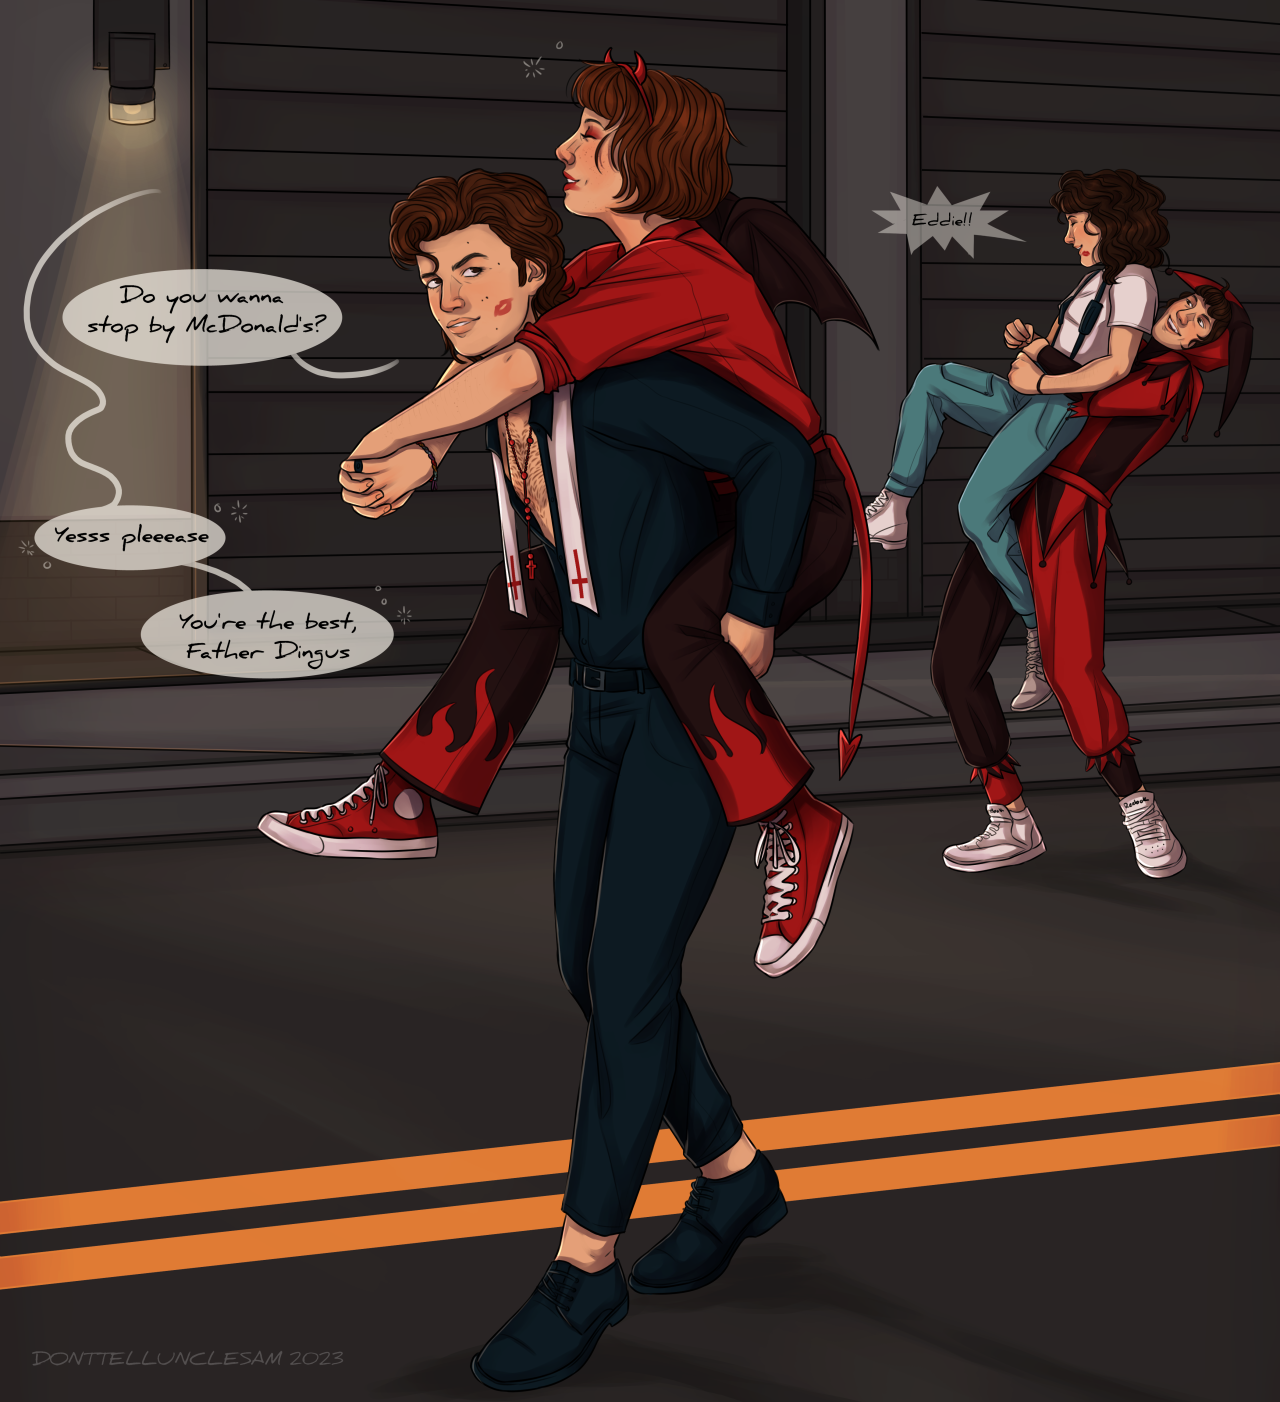 A digital illustration of Steve Harrington, Robin Buckley, Nancy Wheeler, and Eddie Munson from the TV show Stranger Things. The four of them are paired off as they walk down a dimly lit city street. Steve is carrying Robin on his back and she is visibly drunk with small bubbles around her. Robin is dressed as a devil for Halloween. She has a bright red button down shirt with the sleeves rolled to her elbows and black pants with red flames pained on the legs. She has a small red headband with devil horns and a pair of black wings on her back. Her bright red lipstick is smudged. Steve is dressed as a hot priest with black pants and a black button down that is partially open to show his hairy chest. He wears a bright red rosary and a priest's sash around his neck. On his cheek is a red lipstick kiss. Steve's speech bubble reads "Do you wanna stop by McDonald's?" Robin's answering speech bubble reads "Yes please. You're the best, Father Dingus." In the background, Eddie is dressed as a medieval court jester. His jumpsuit is black and red and he has his hair tucked into a silly jester's cowl. He is grinning widely as he picks up Nancy by her waist. Nancy is dressed as Ripley from the film Aliens and wears a pair of light blue cargo pants with a white tshirt and white boots. Nancy is laughing and her spiky speech bubble reads "Eddie!" She has a red kiss mark next to her mouth.